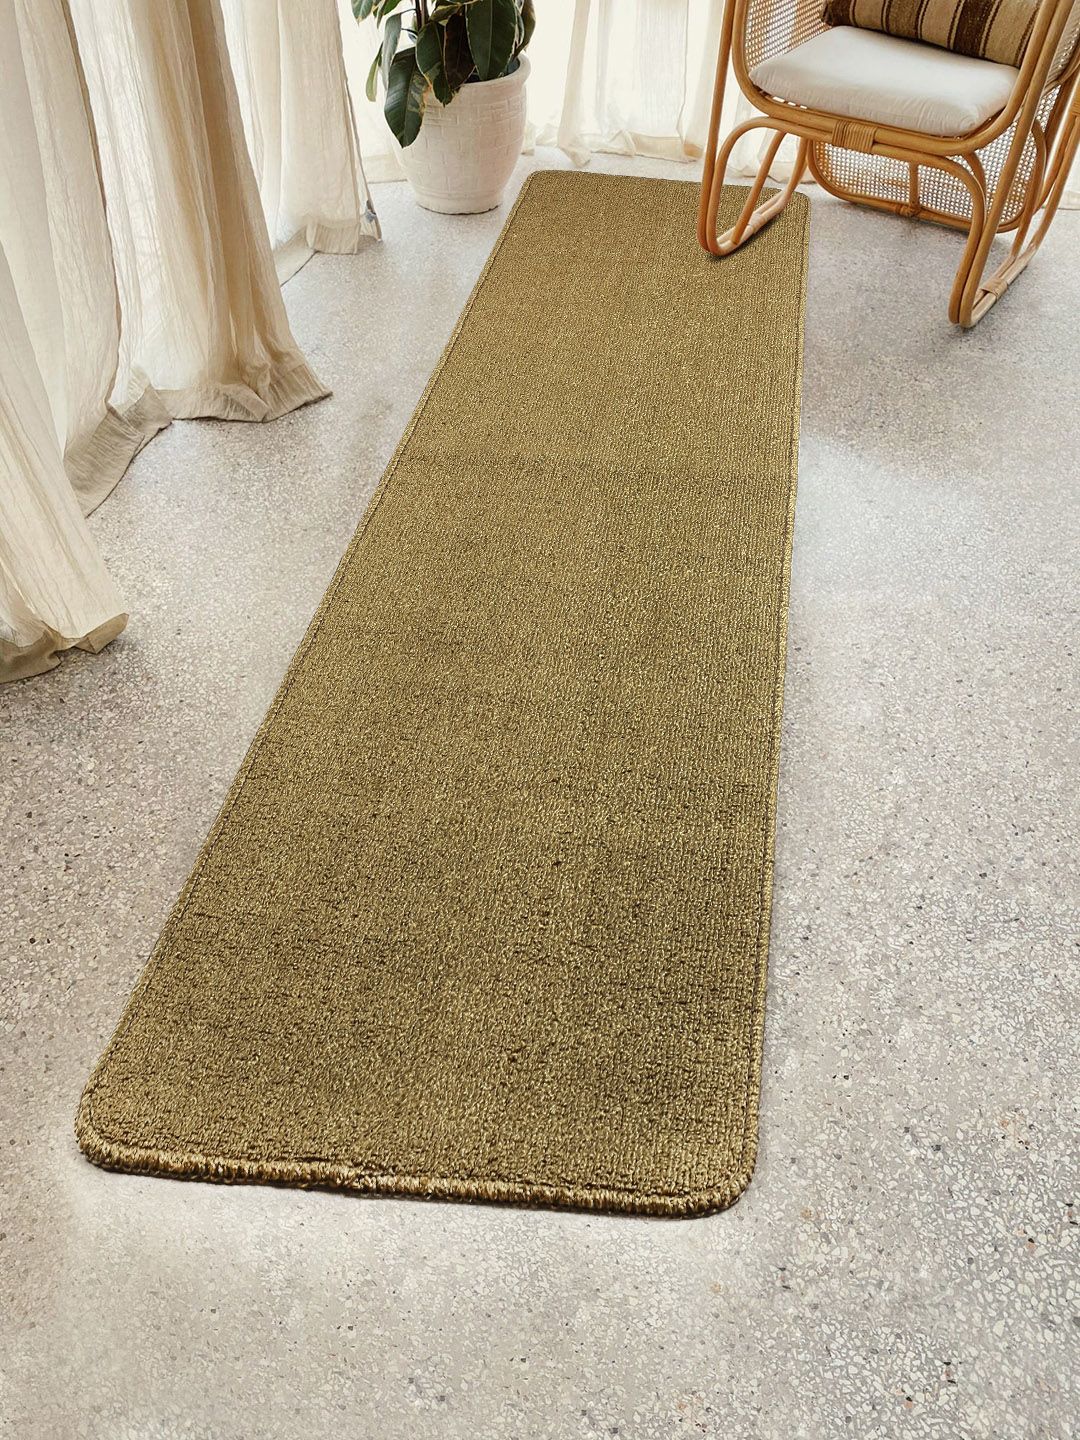 Saral Home Gold-Toned Solid Anti-Skid Floor Runner Price in India